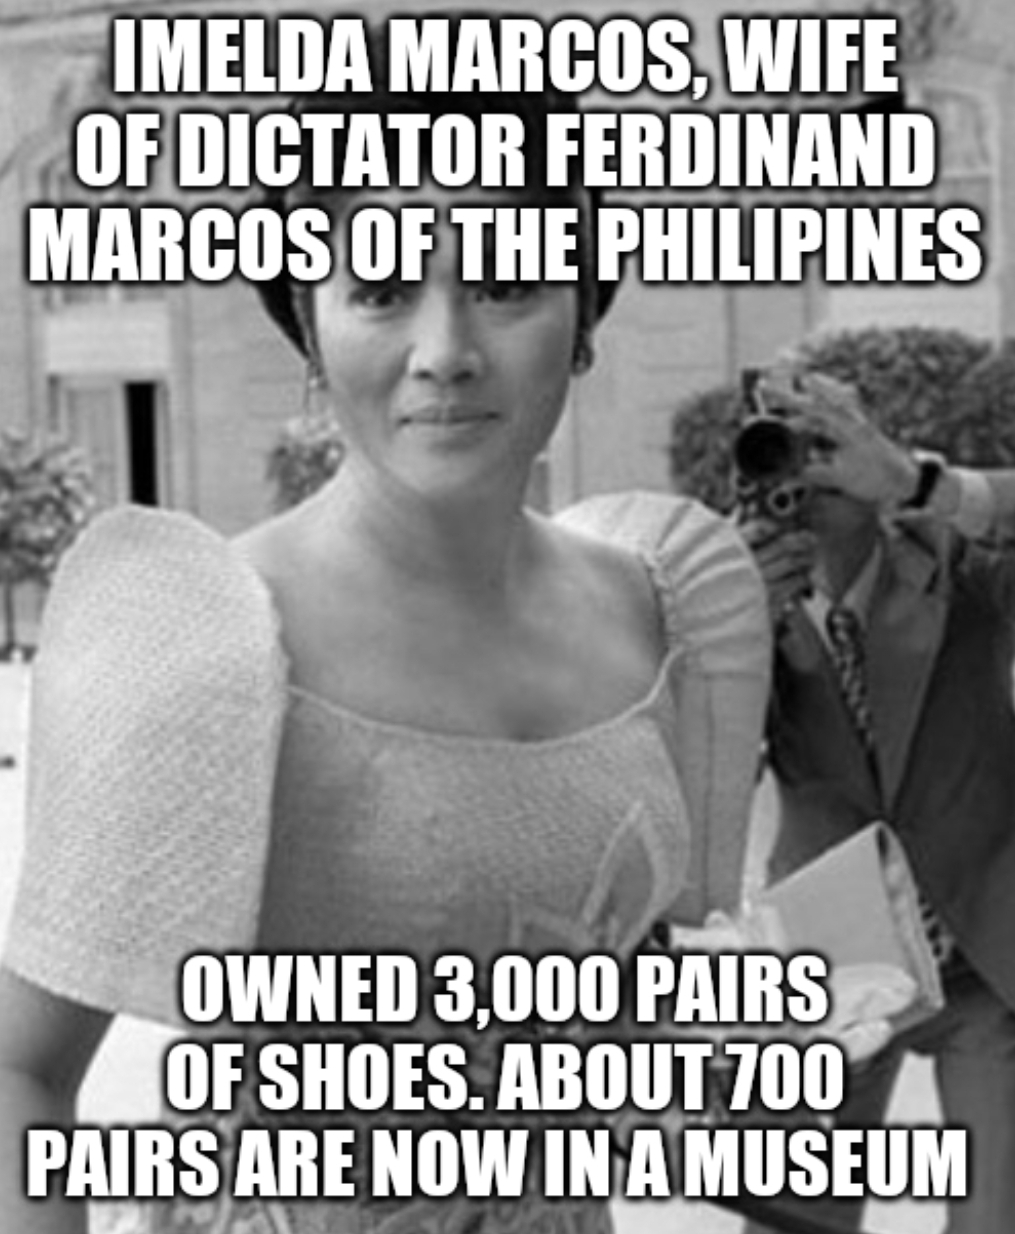 photo caption - Imelda Marcos, Wife Of Dictator Ferdinand Marcos Of The Philipines Owned 3,000 Pairs Of Shoes. About 700 Pairs Are Now In A Museum